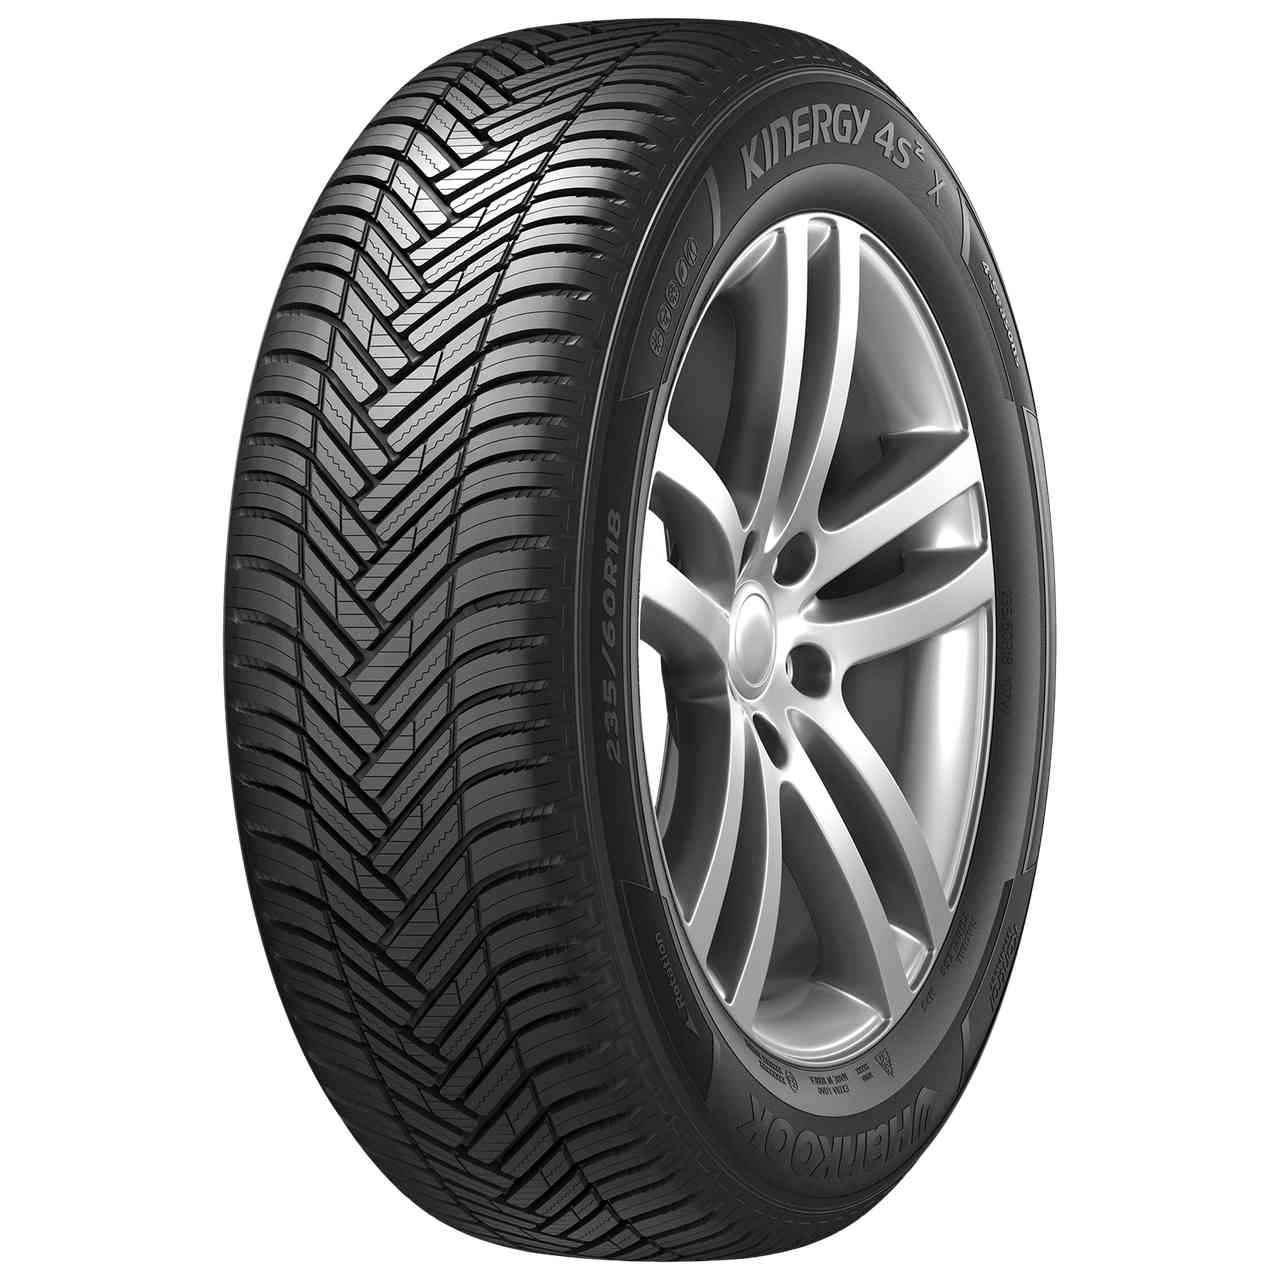 HANKOOK KINERGY 4S 2 X (H750A) 245/45R20 103V BSW